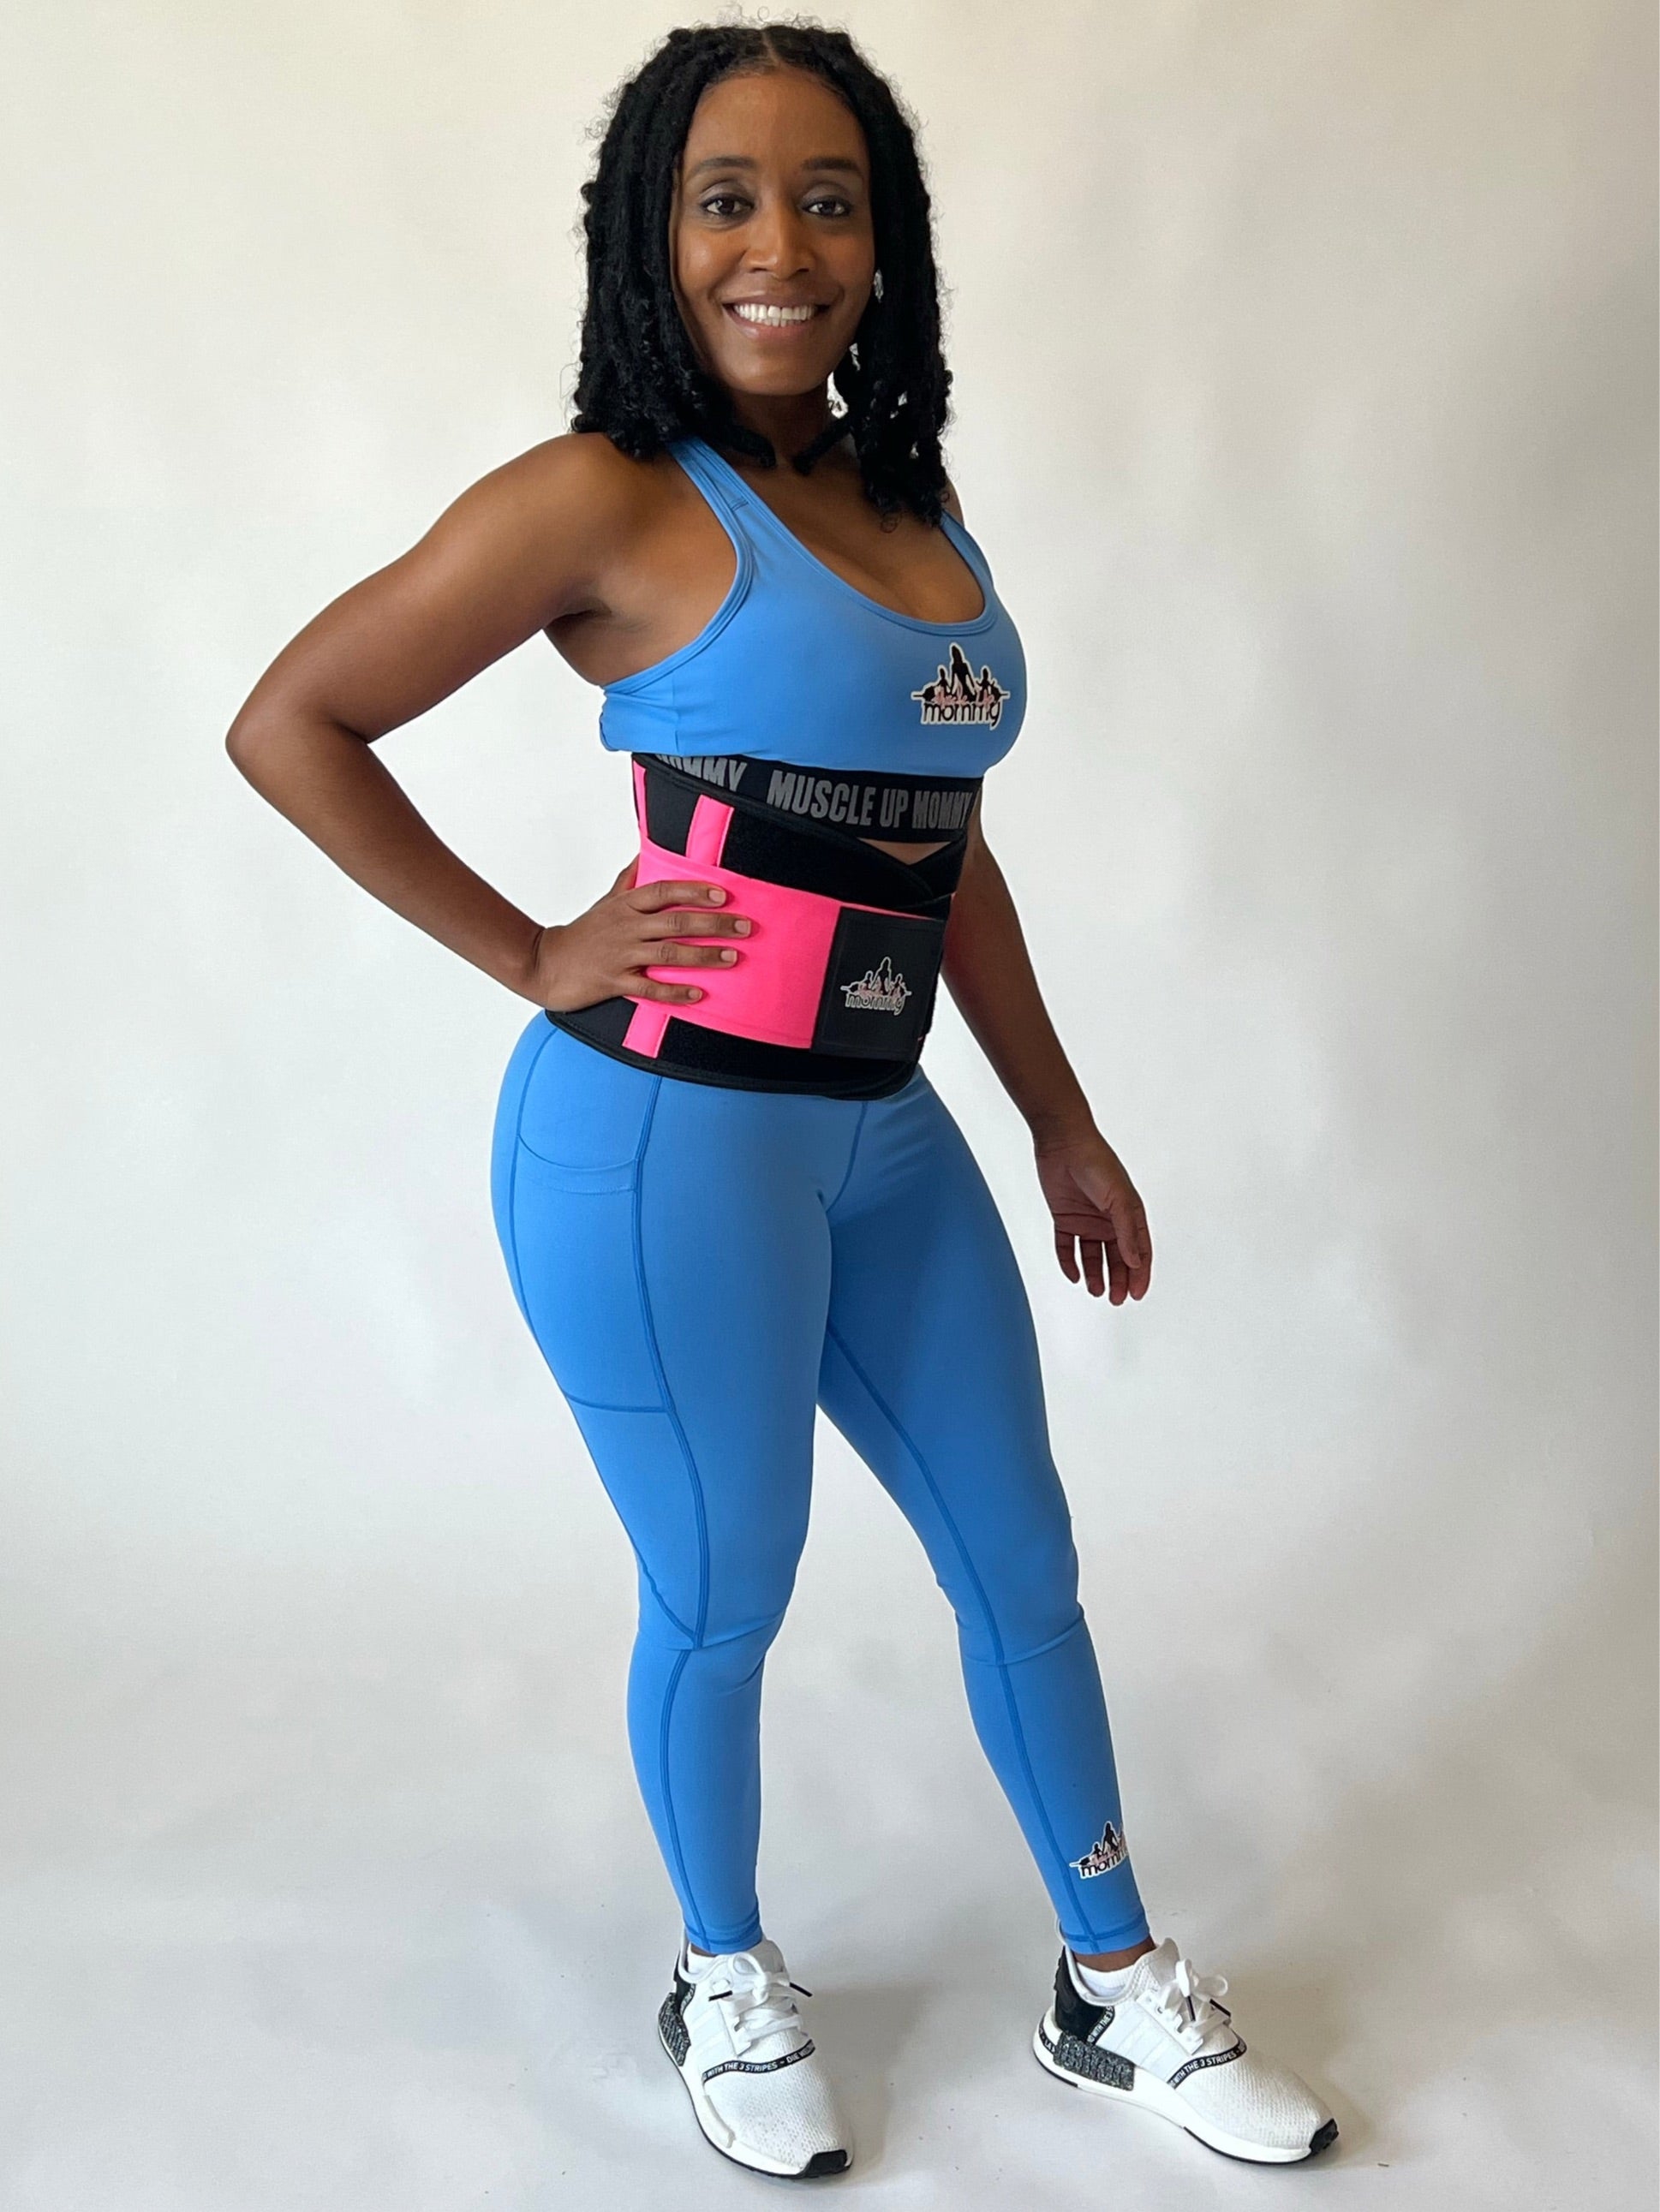 5 Best Waist Trainer For Mommy Pooch – Top Reviews by hidethatfat - Issuu